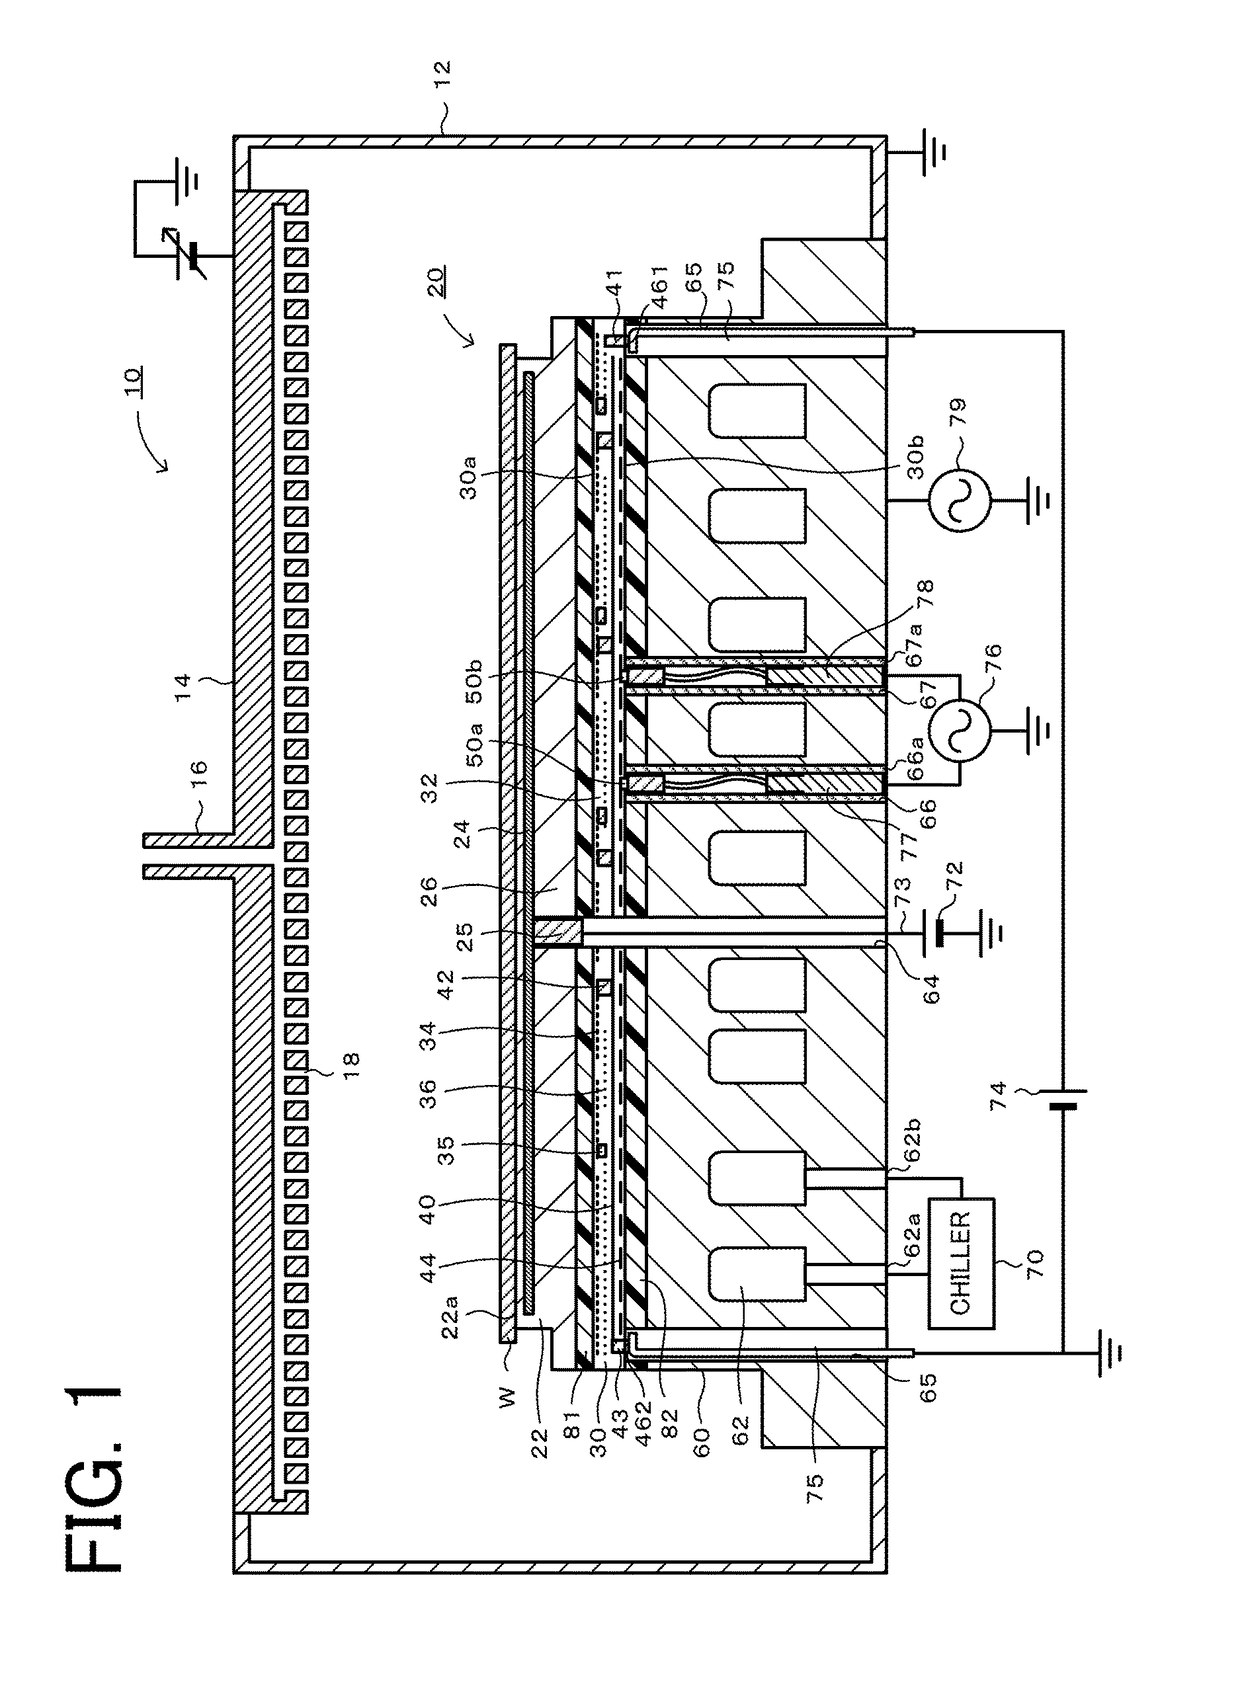 Metal wiring bonding structure and production method therefor